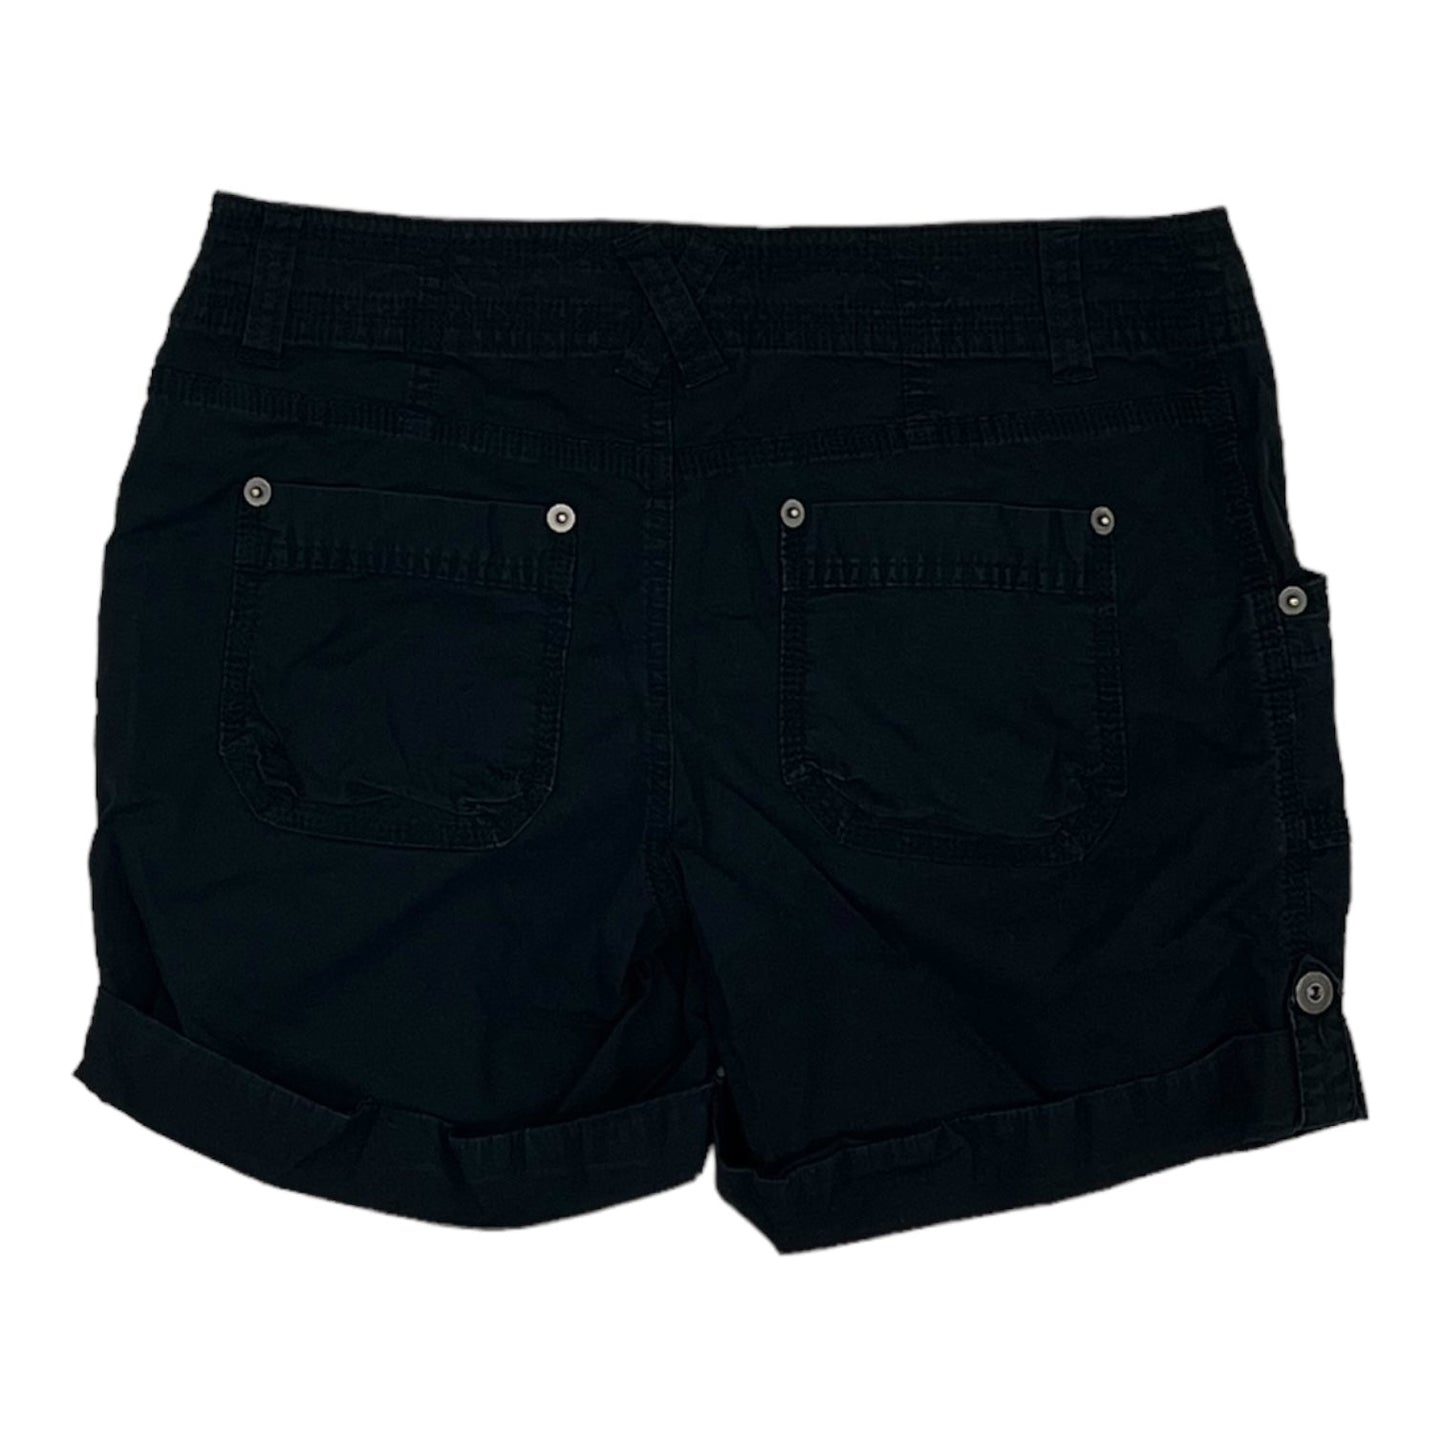 BLACK SHORTS by INC Size:4